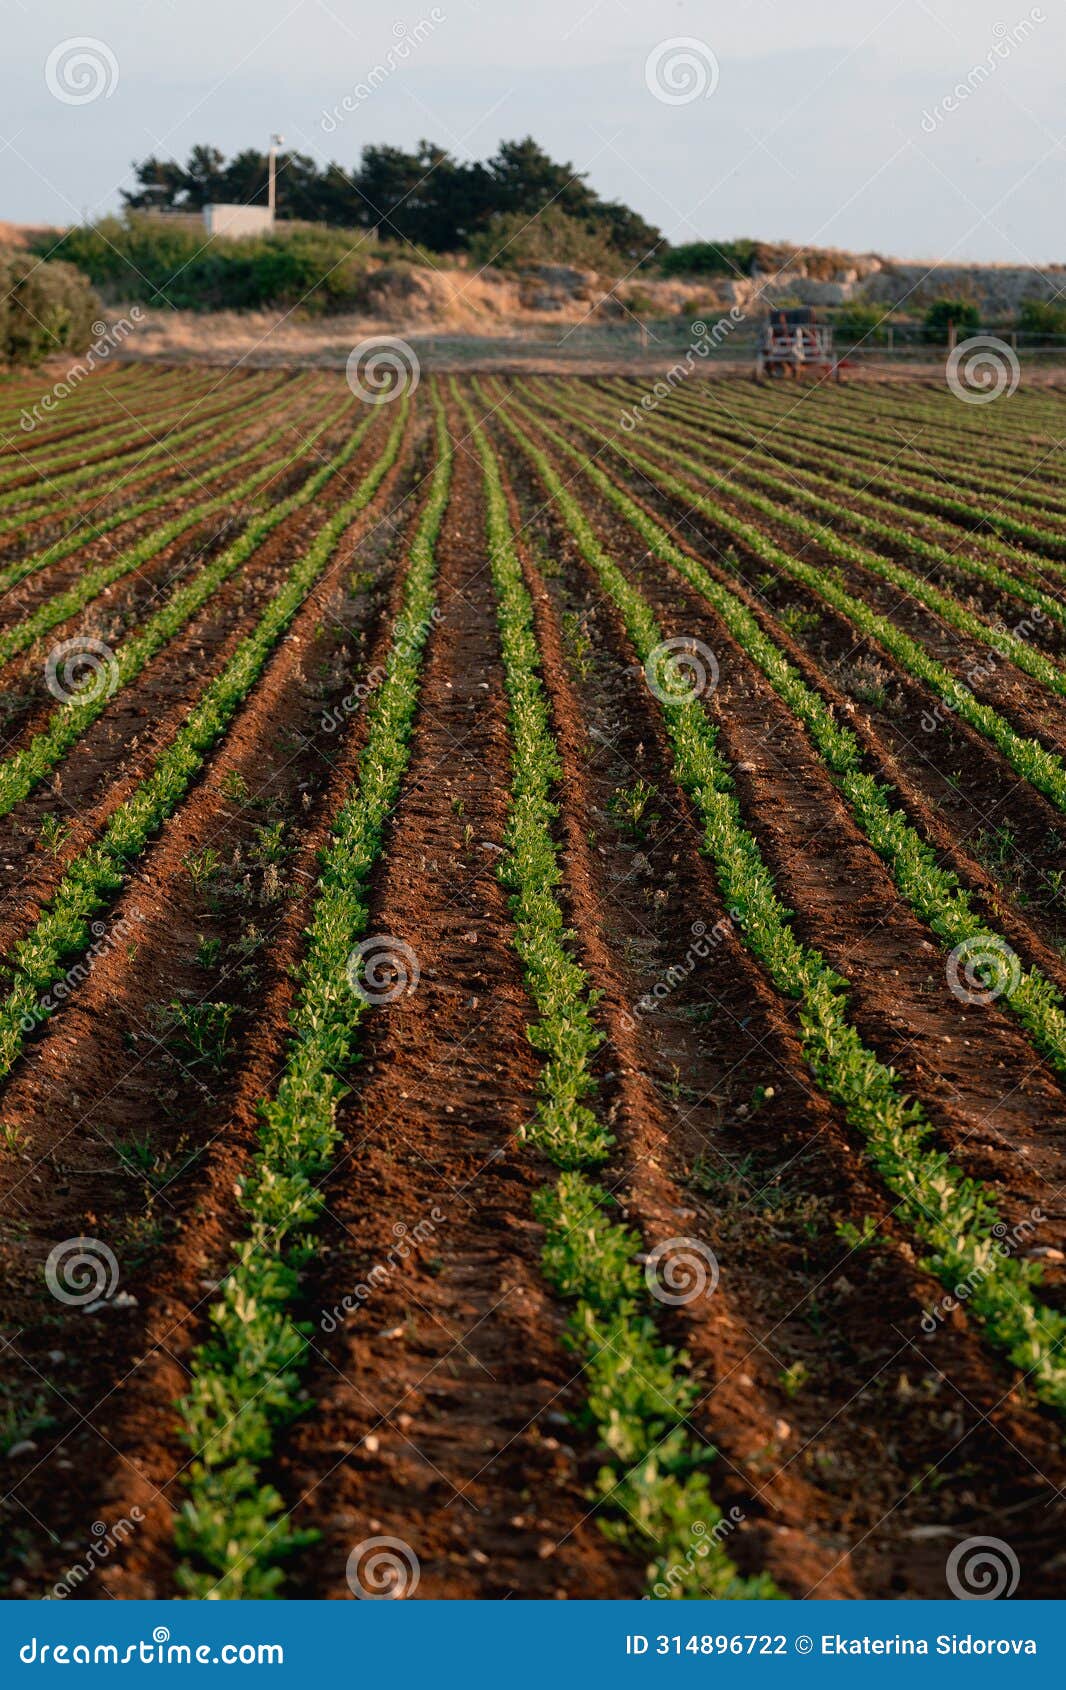 agriculture and farming - leguminous plant plantation in the field